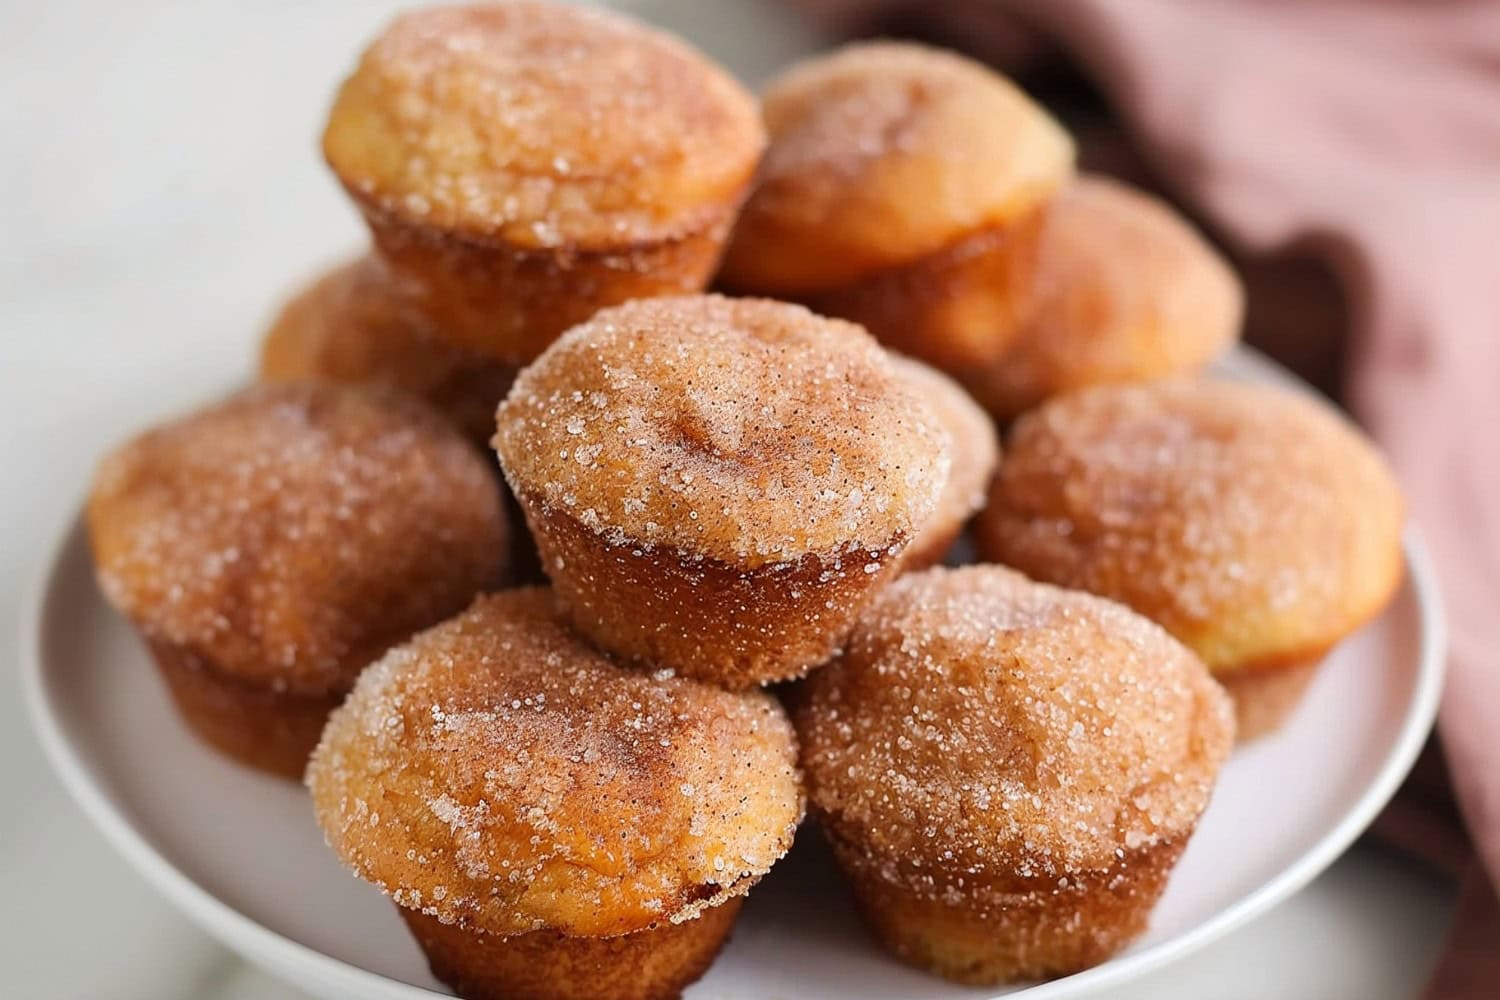 Bunch of donut muffins in a white plate.